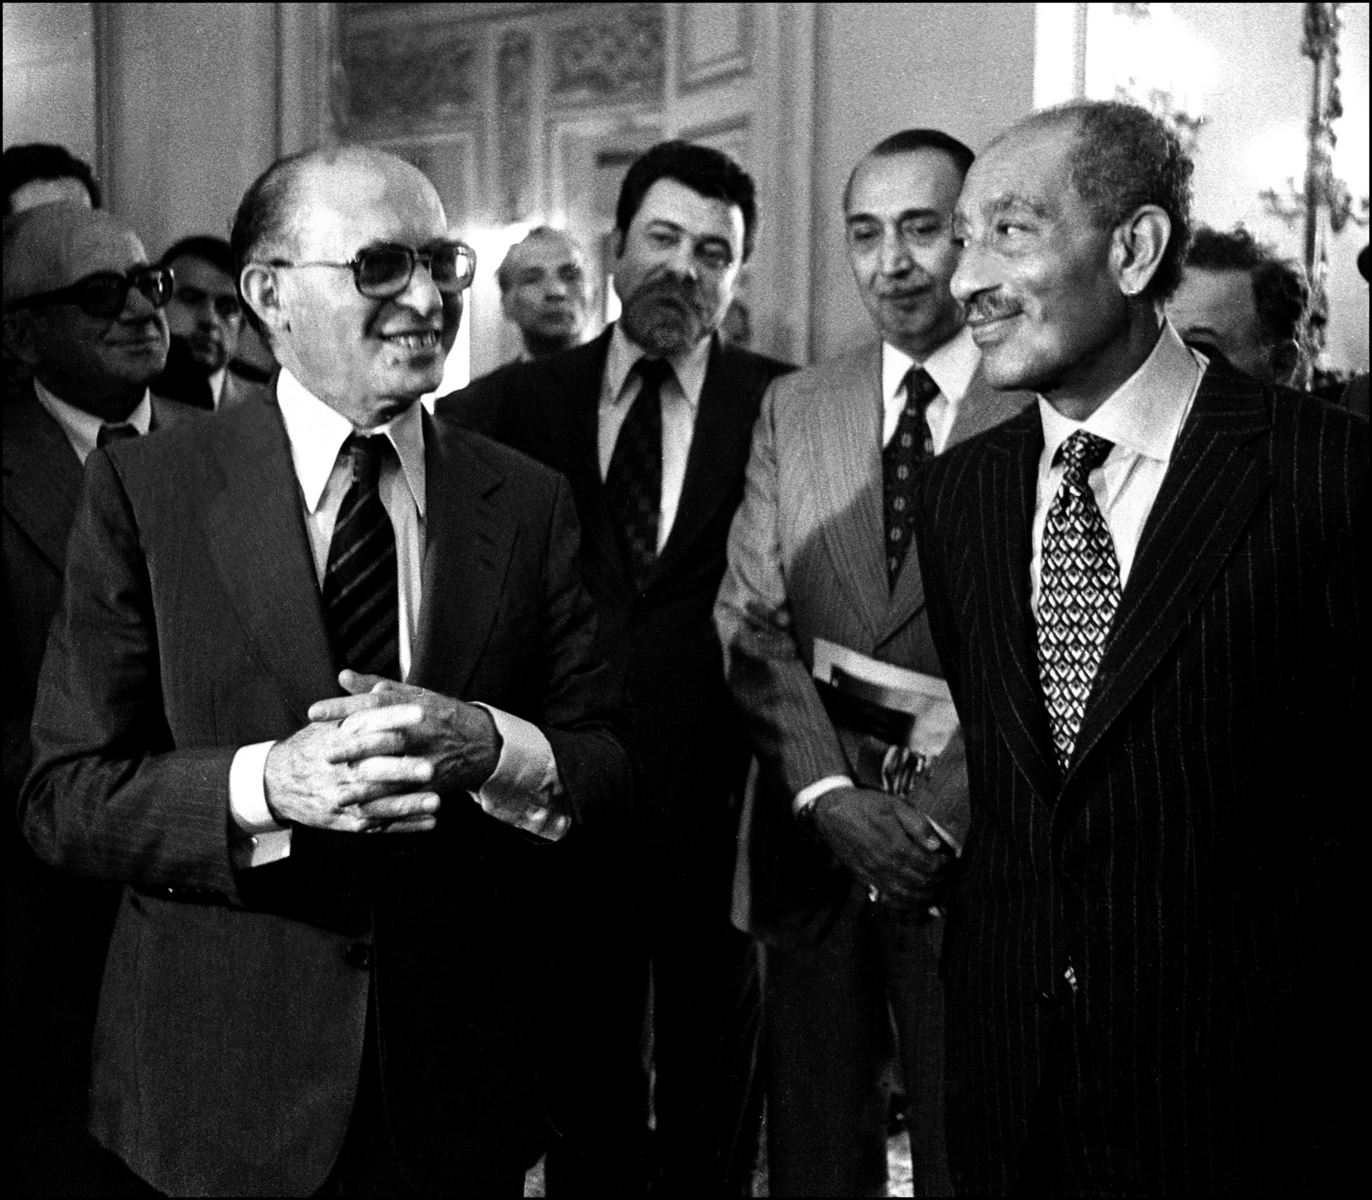 Sadat and Begin are all smiles at the end of their press conference. : Sadat-Mubarak 1978-1981 : BILL FOLEY 